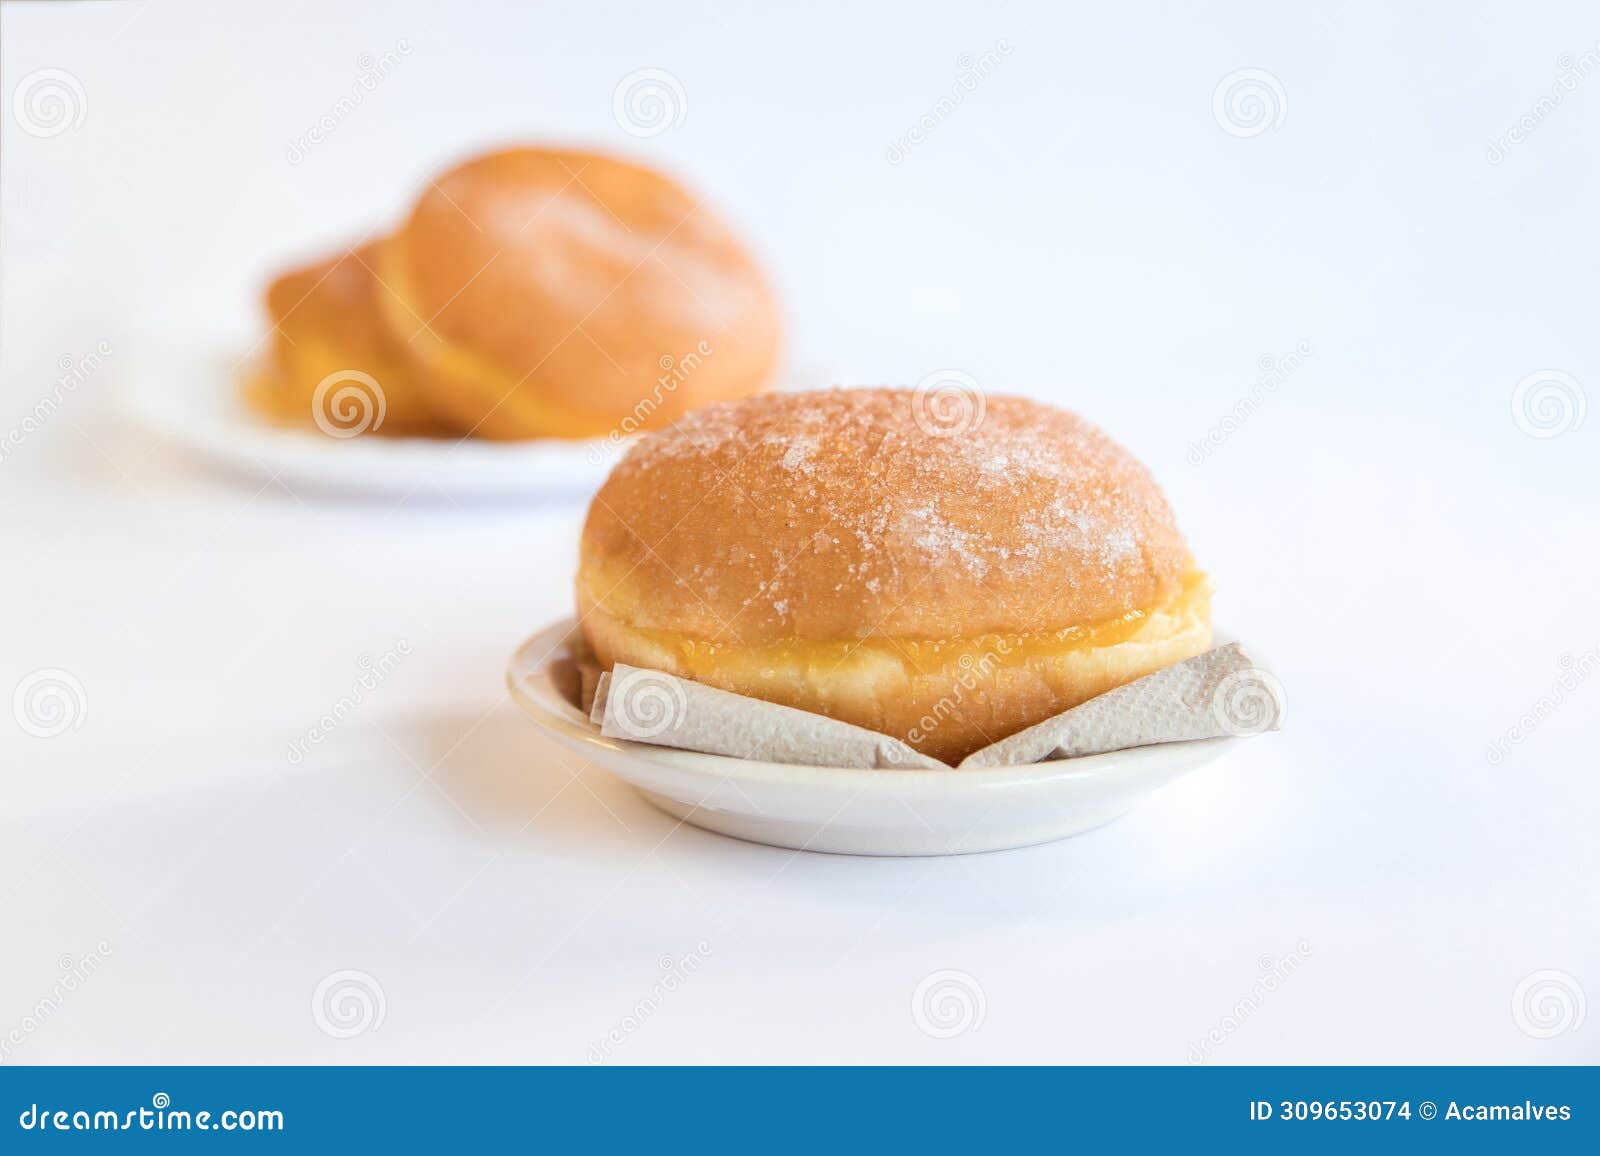 bolas de berlim, berliner or donuts filled with egg jam, a very popular dessert in portuguese pastry shops